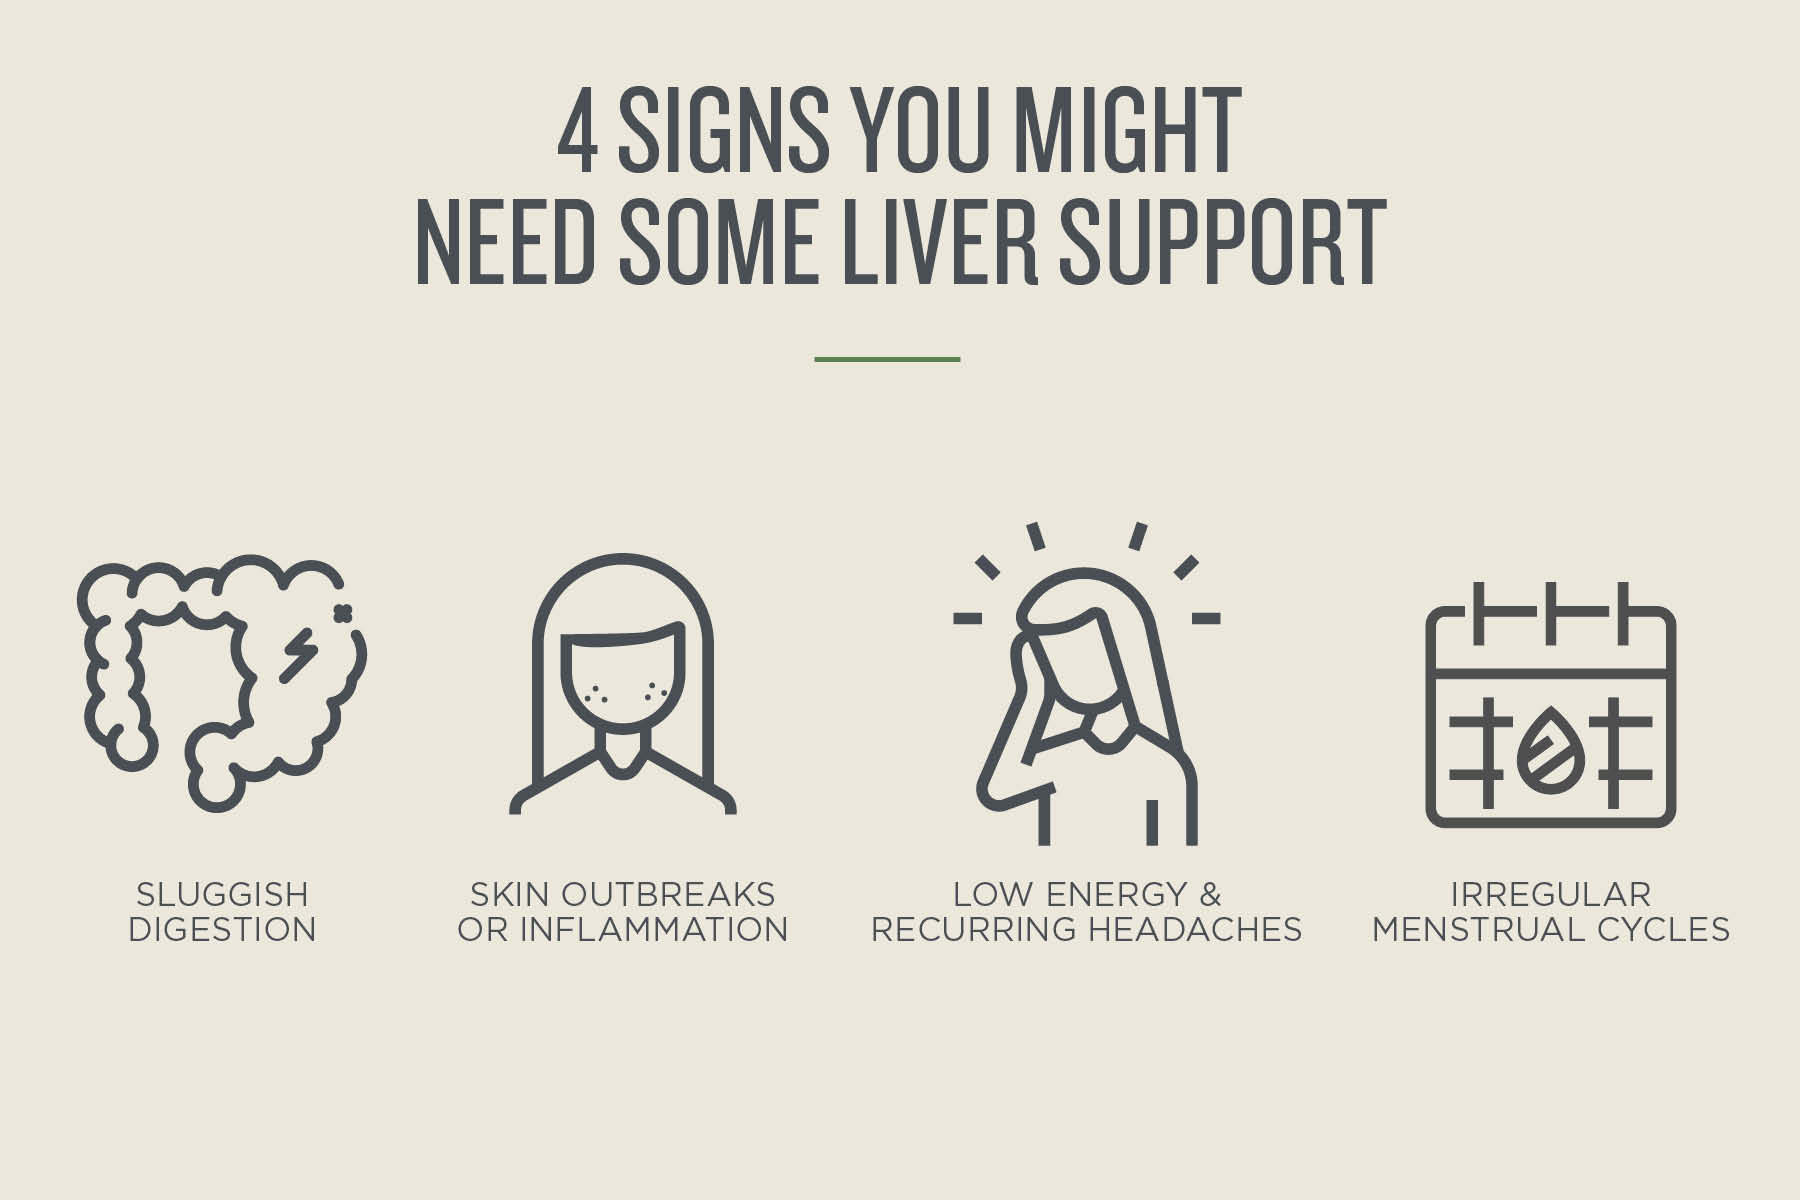 4 signs you might need some liver support